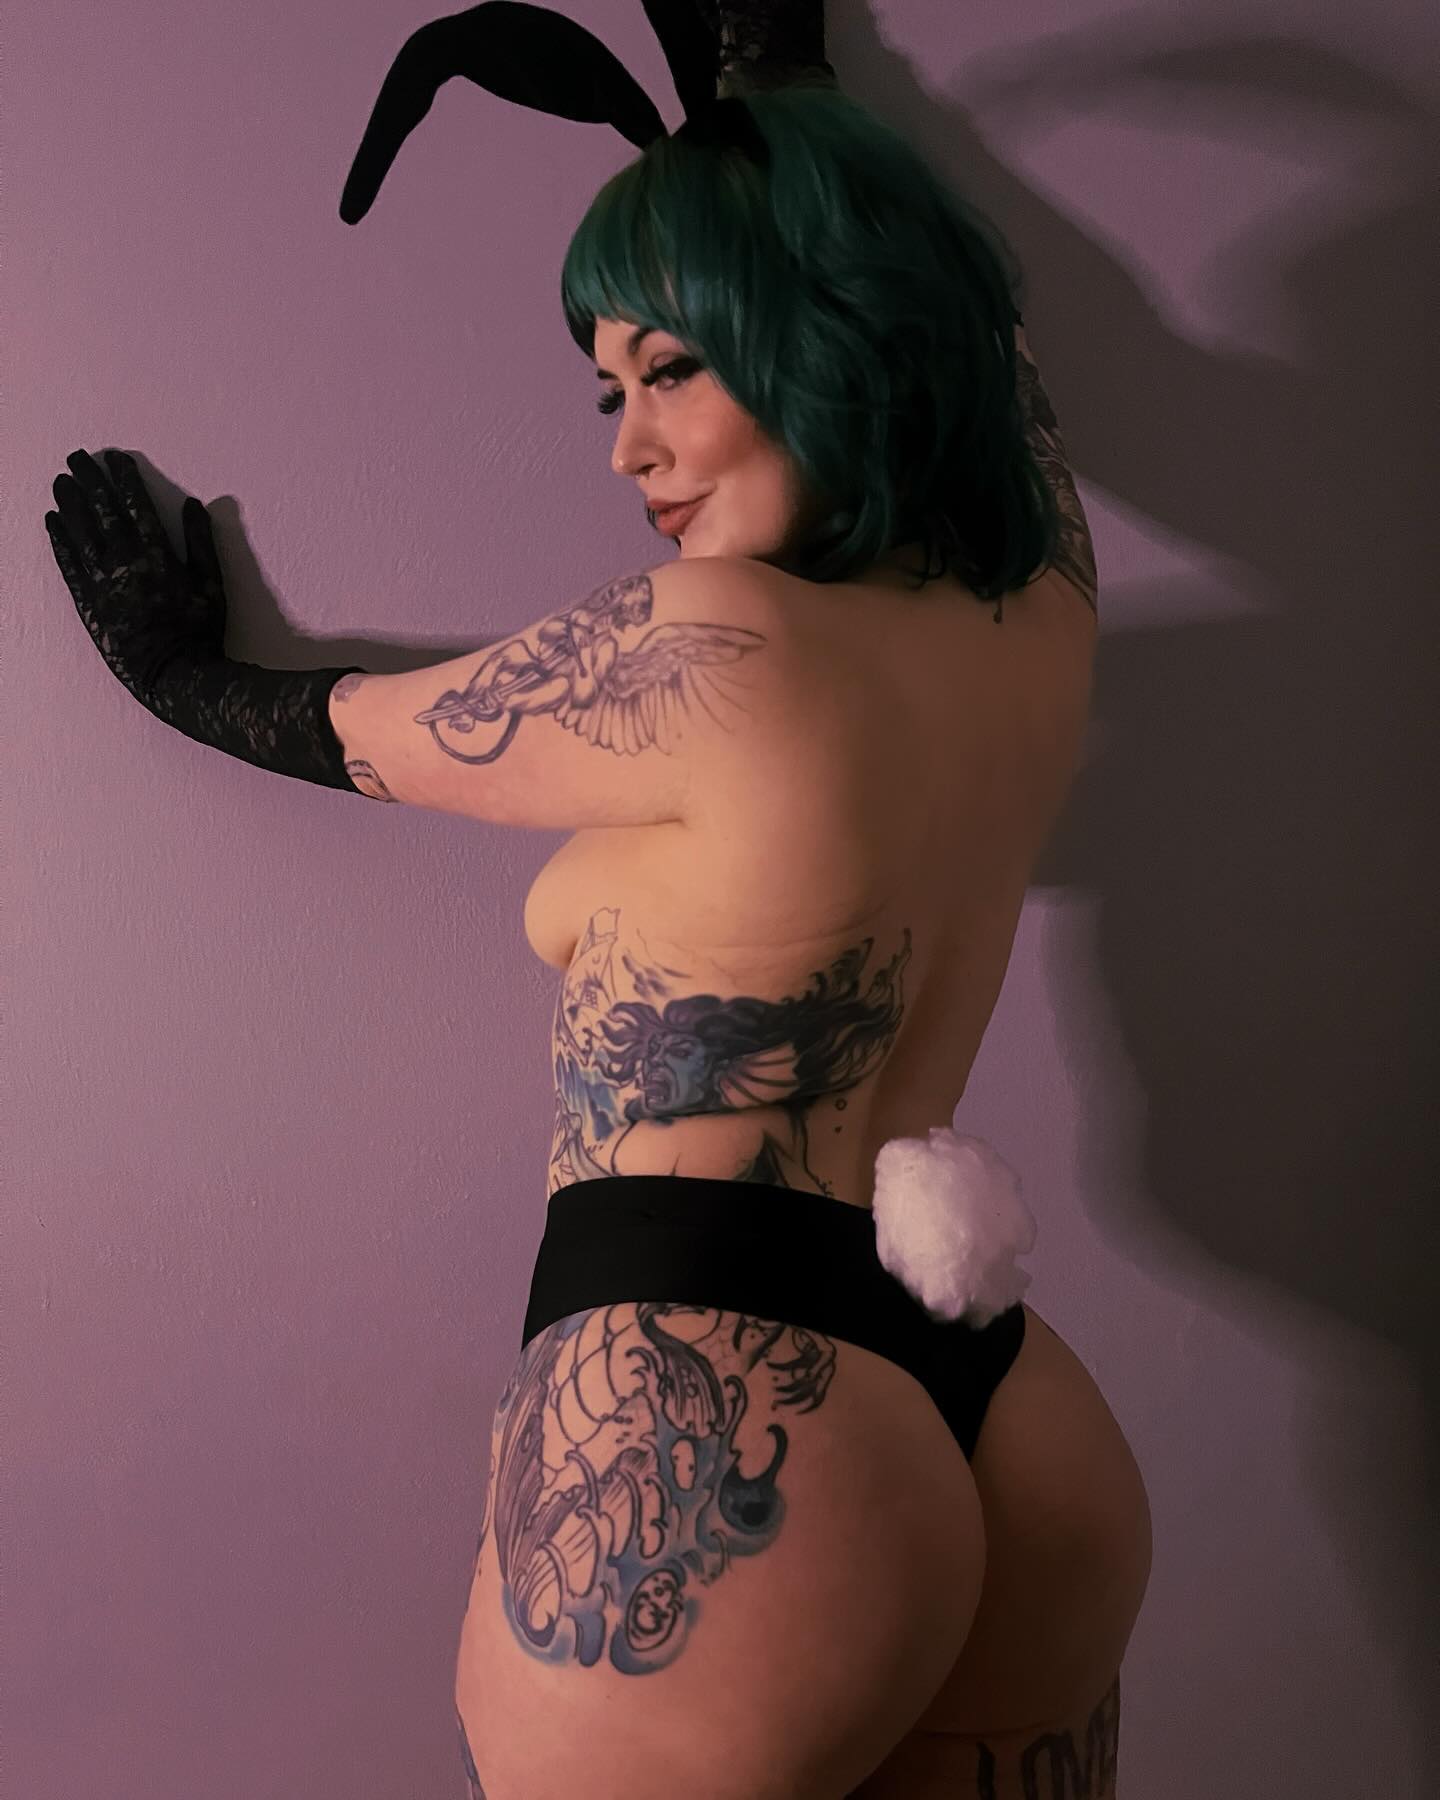 Let me be your Easter Bunny 🐇💕

✨see me full bunny on my on1yfanz✨